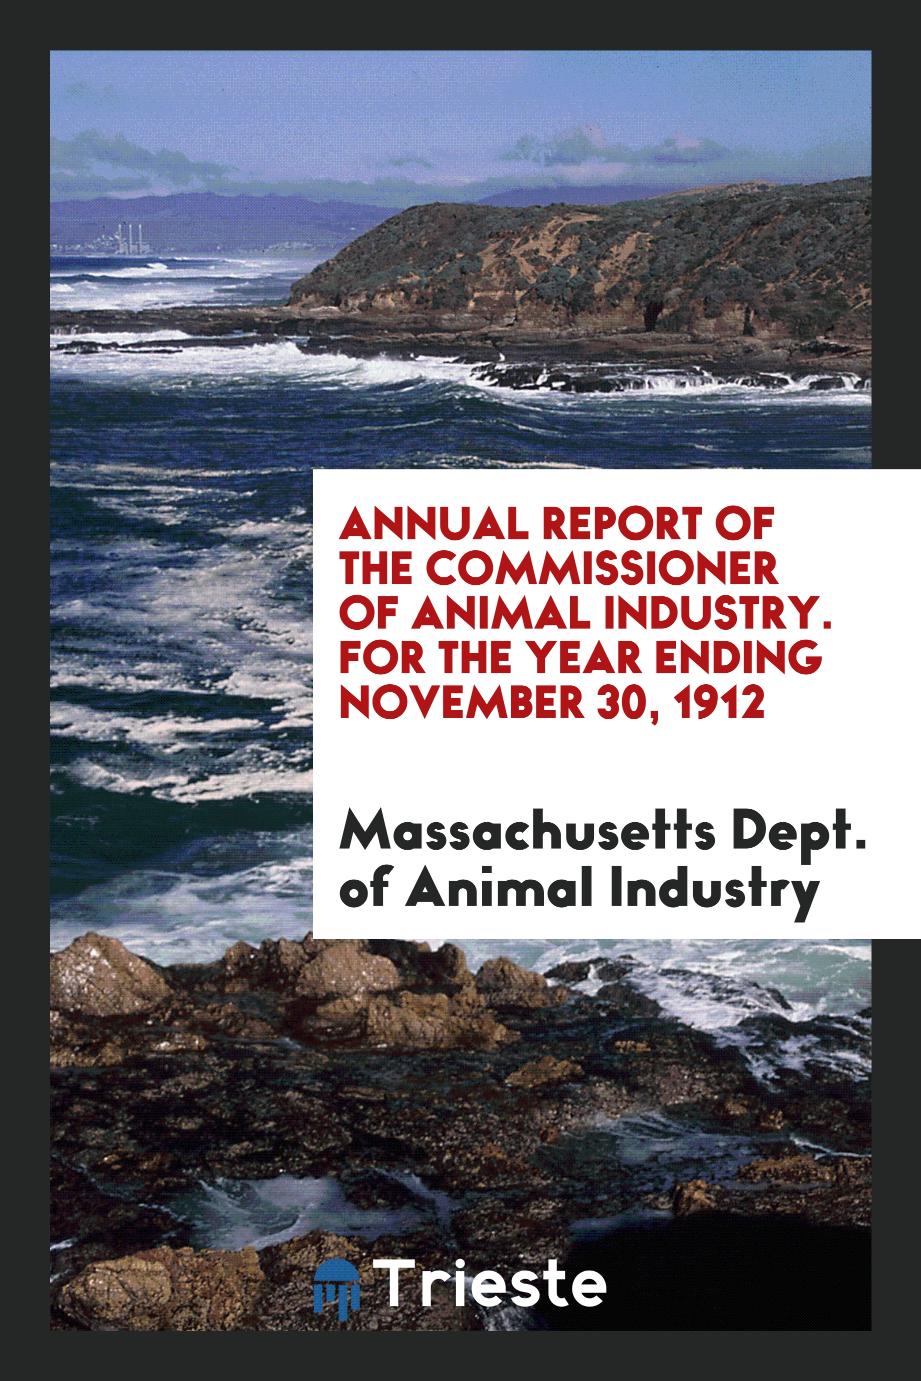 Annual Report of the commissioner of animal industry. For the year ending November 30, 1912